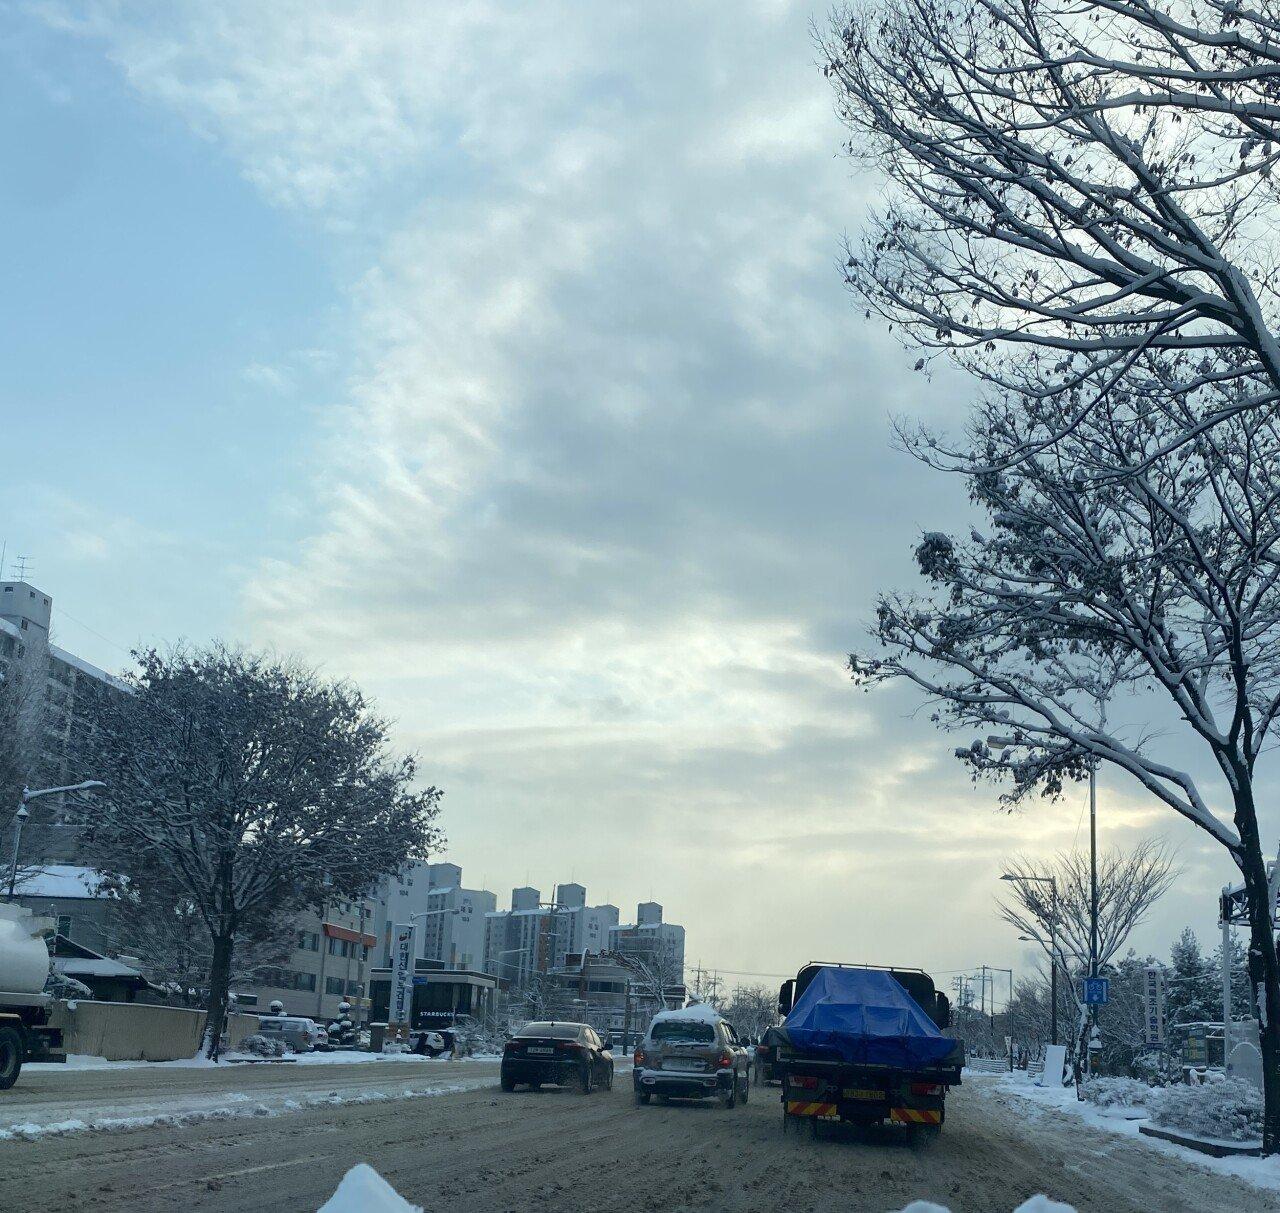 Road conditions in Jeonju after the controversy over icy roads